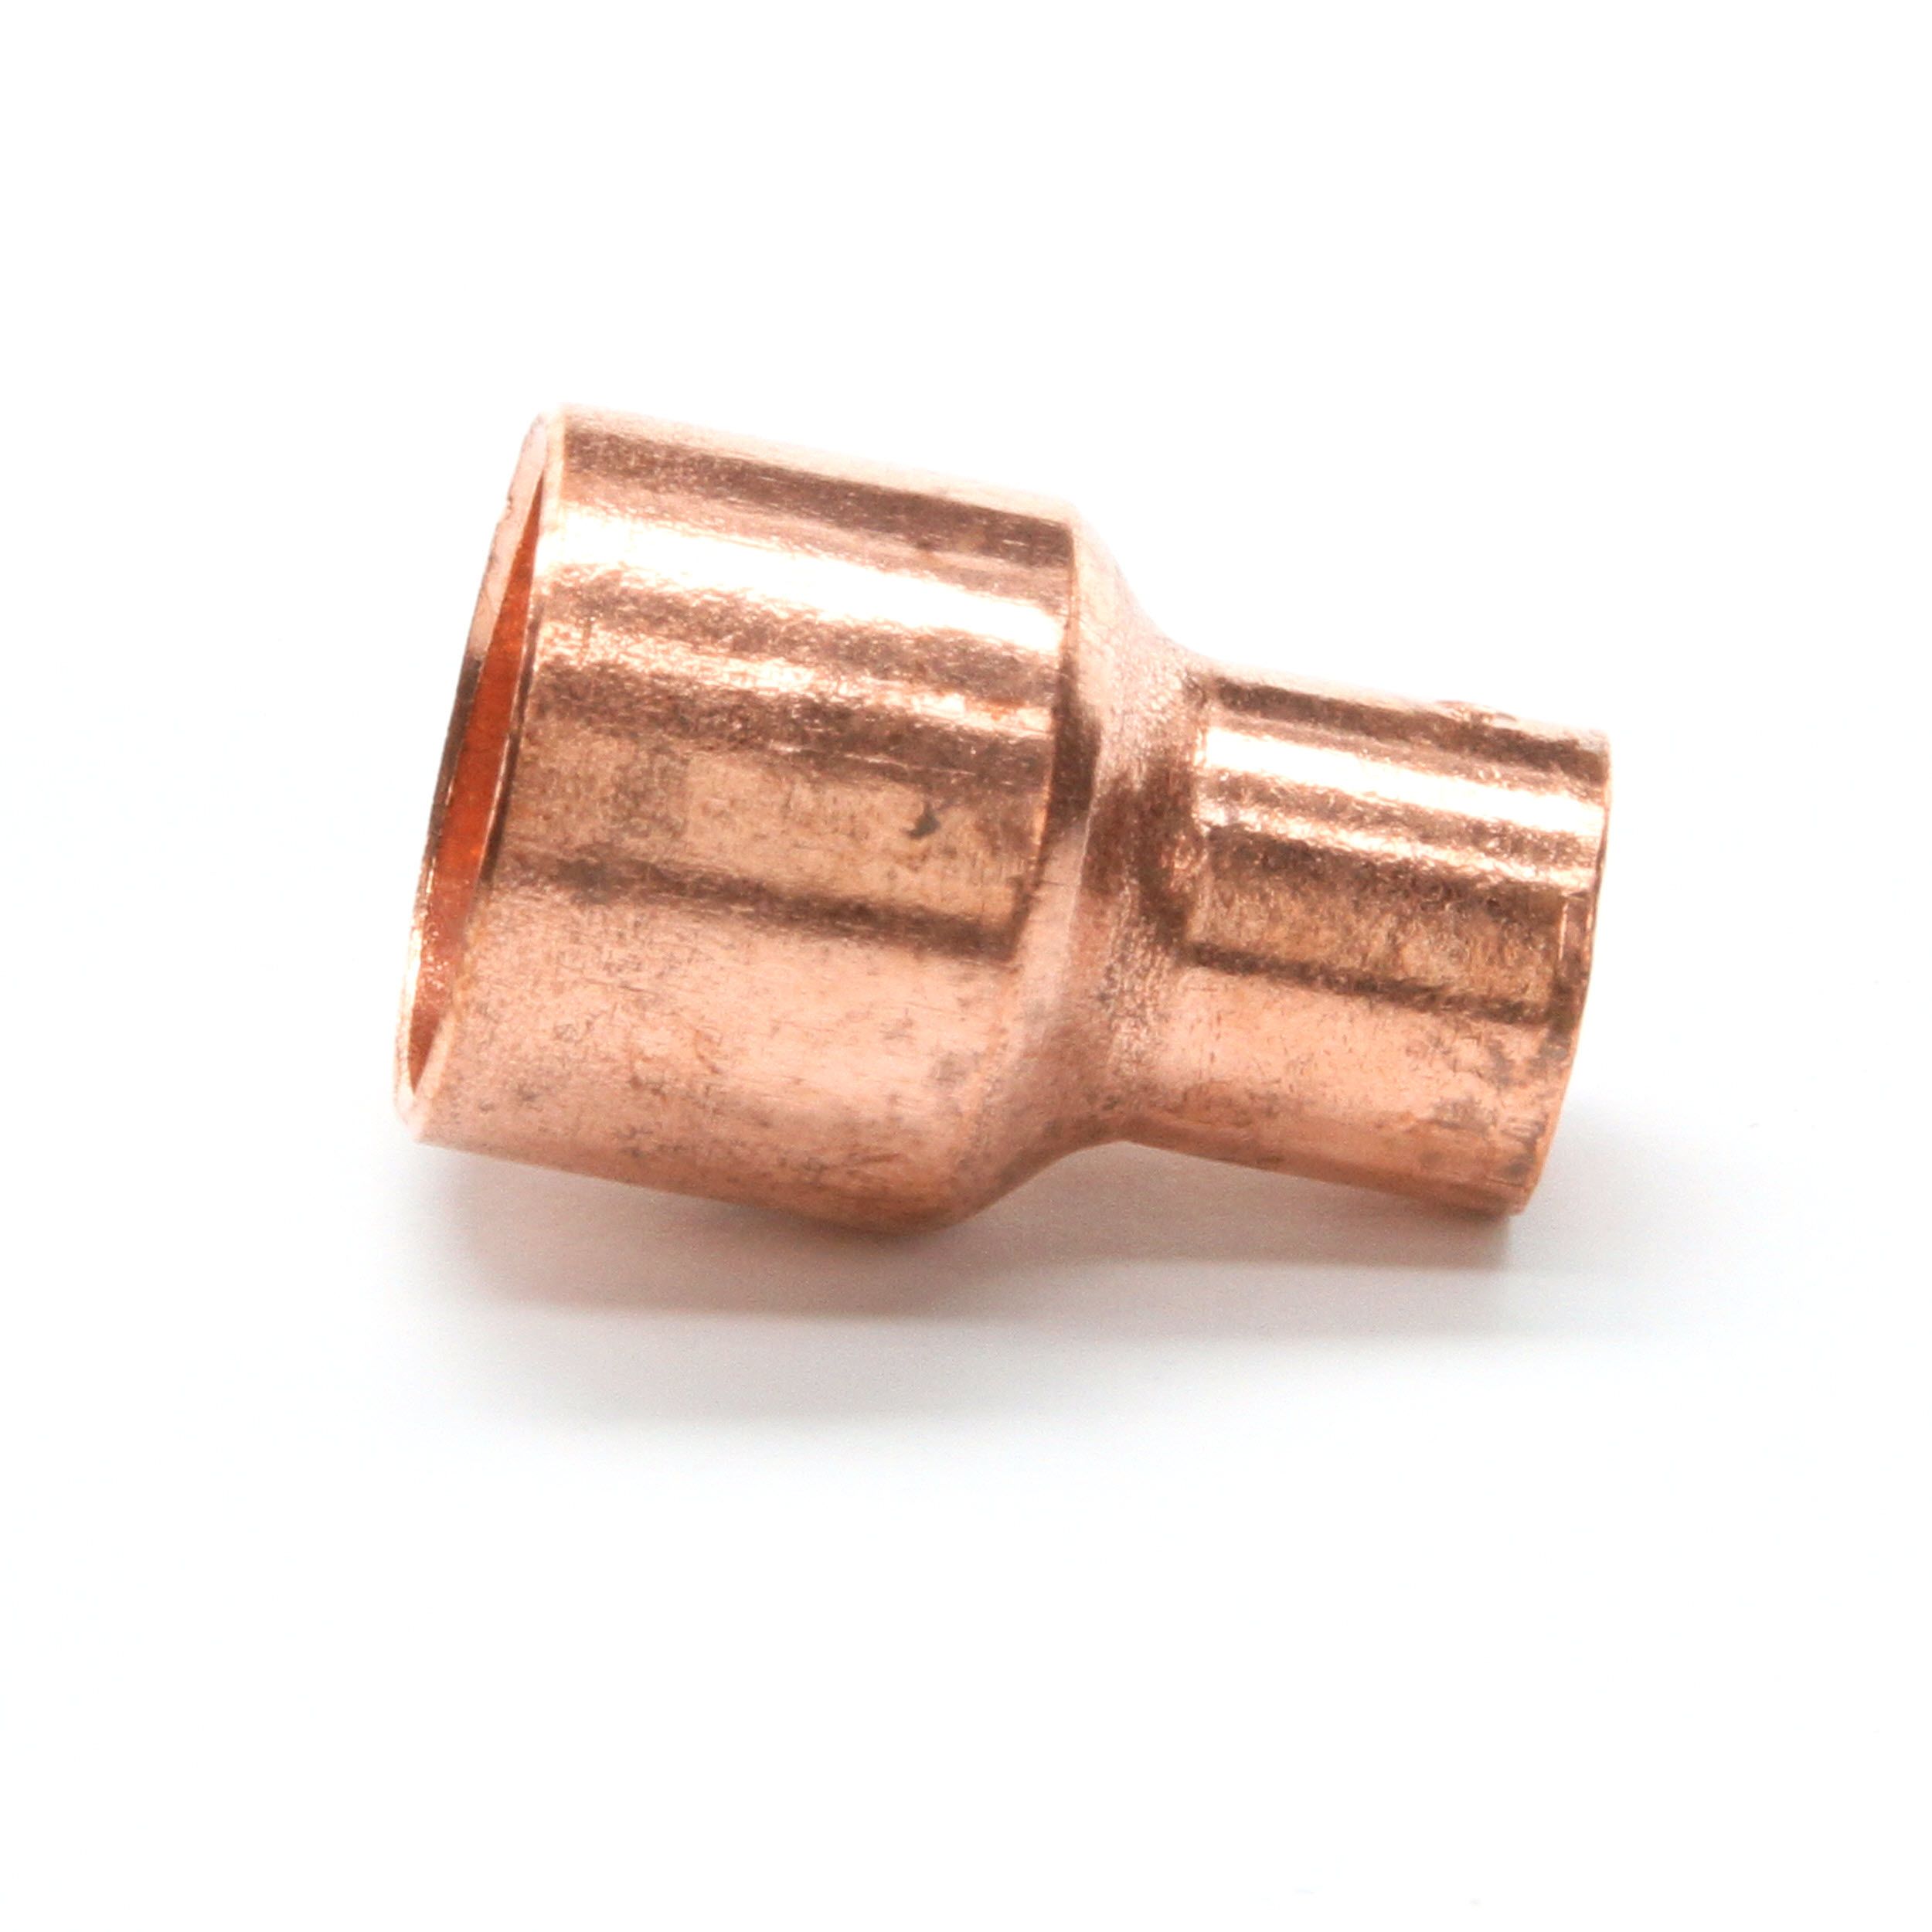 x 1/2" Copper Bell Reducer Sweat Solder Pressure Nibco 1" Fitting Street